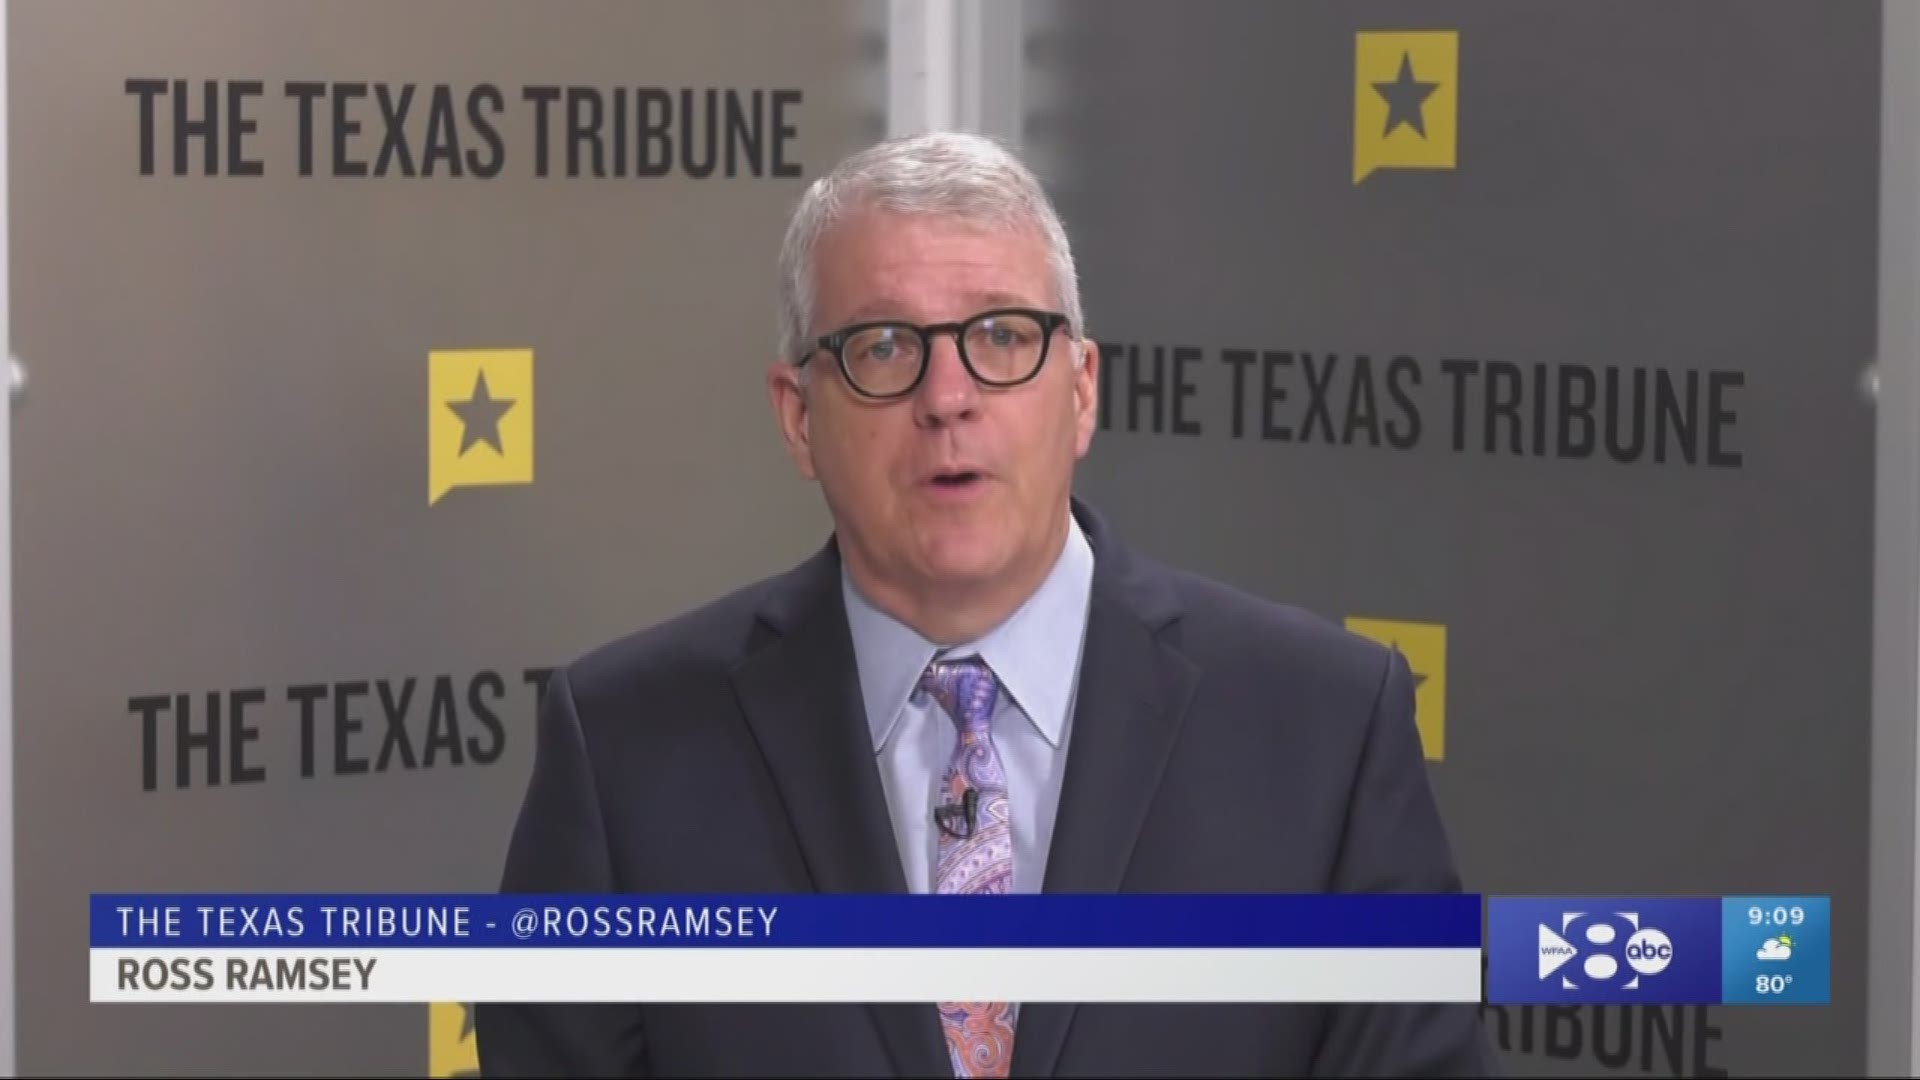 On September 1, DPS will receive $212 million to hire more employees. Ross Ramsey, the co-founder and executive editor of the Texas Tribune, joined host Jason Whitely to discuss whether more money will fix the problem. Ross and Jason also talked about the new laws that will go into effect on September 1.